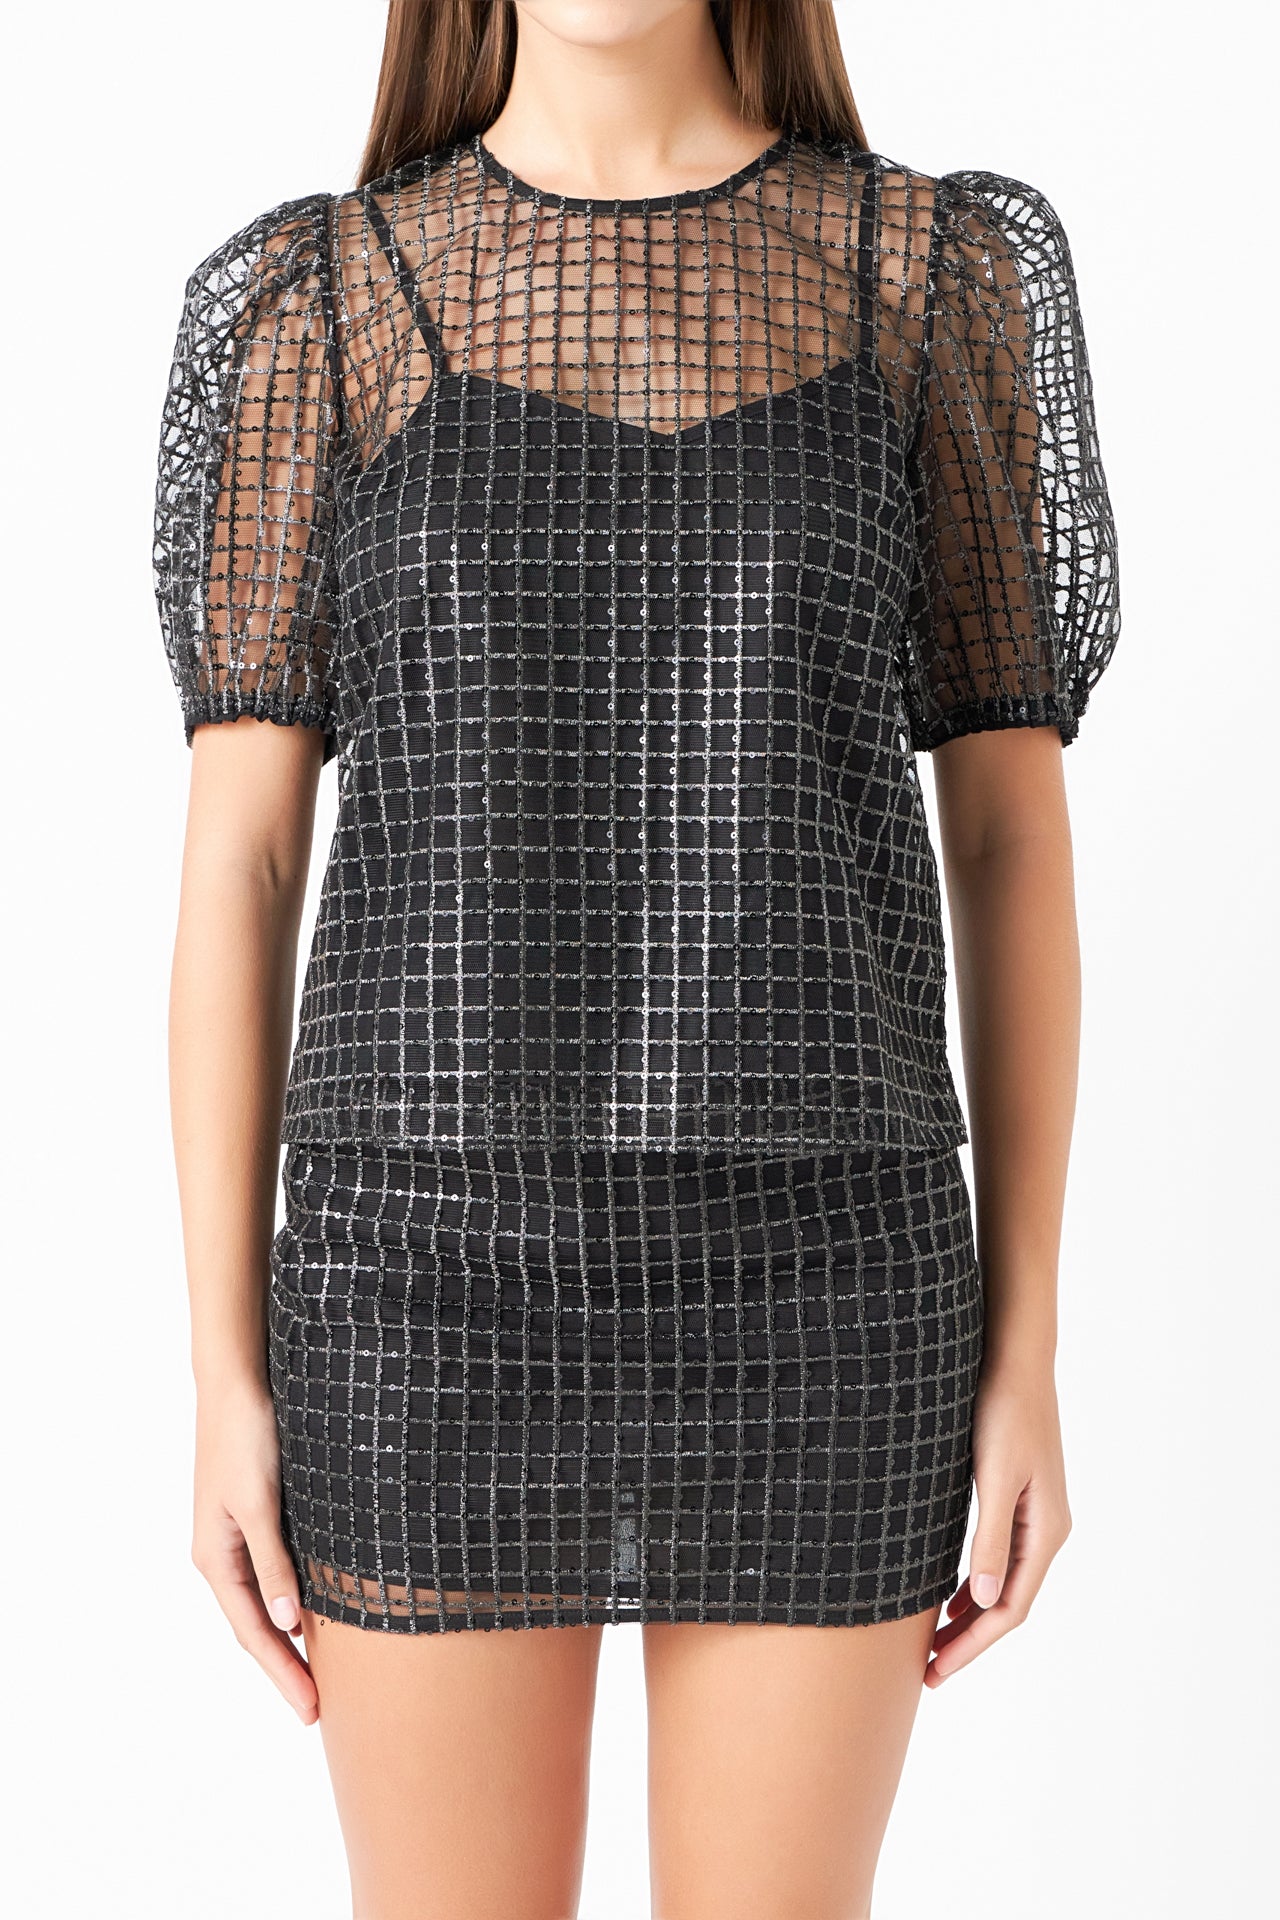 ENDLESS ROSE - Sequins Mesh Grid Top - TOPS available at Objectrare